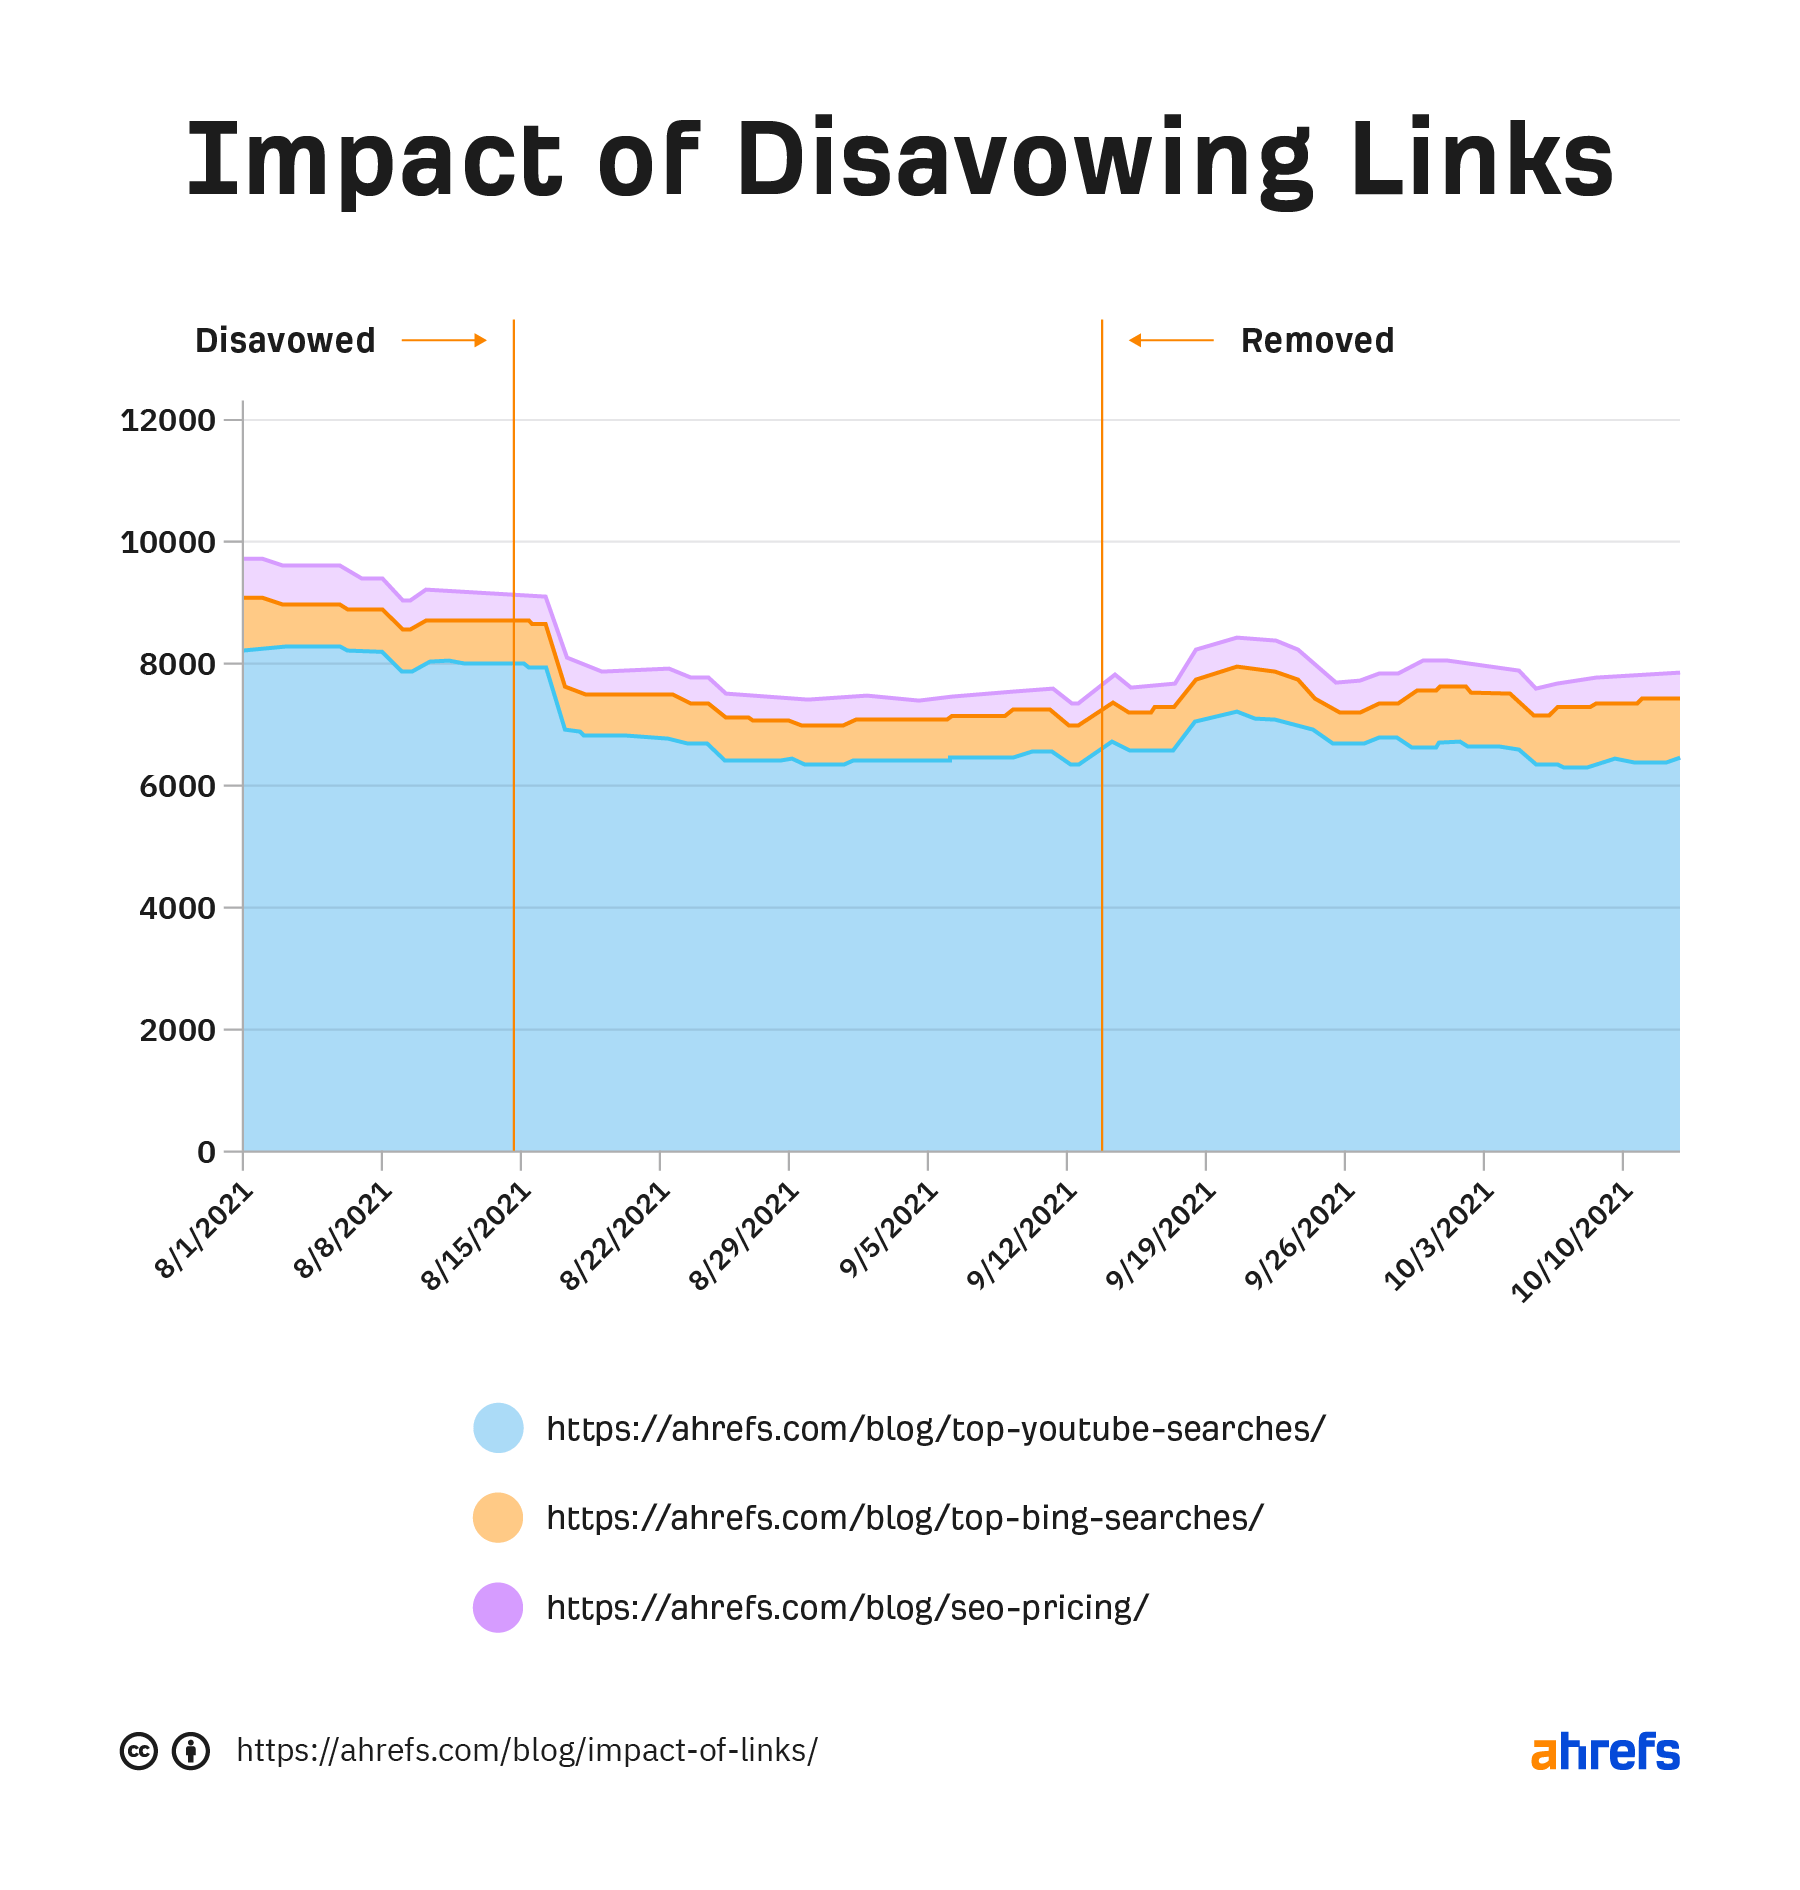 Graph showing impact of disavowing links